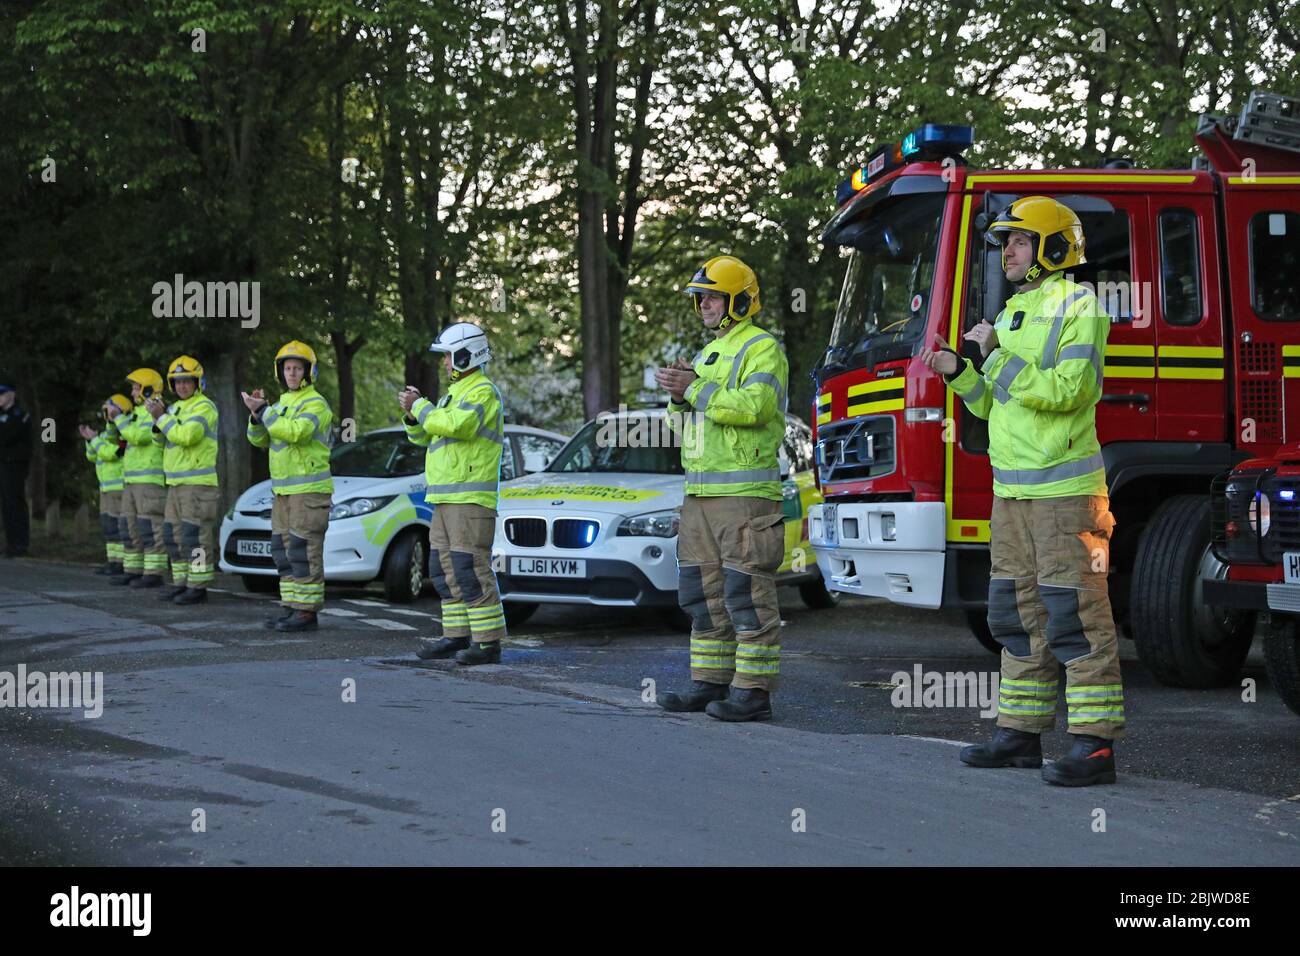 Members of the Hampshire Fire and Rescue Service in Hartley Wintney, near Basingstoke, join in the applause to salute local heroes during Thursday's nationwide Clap for Carers to recognise and support NHS workers and carers fighting the coronavirus pandemic. Stock Photo